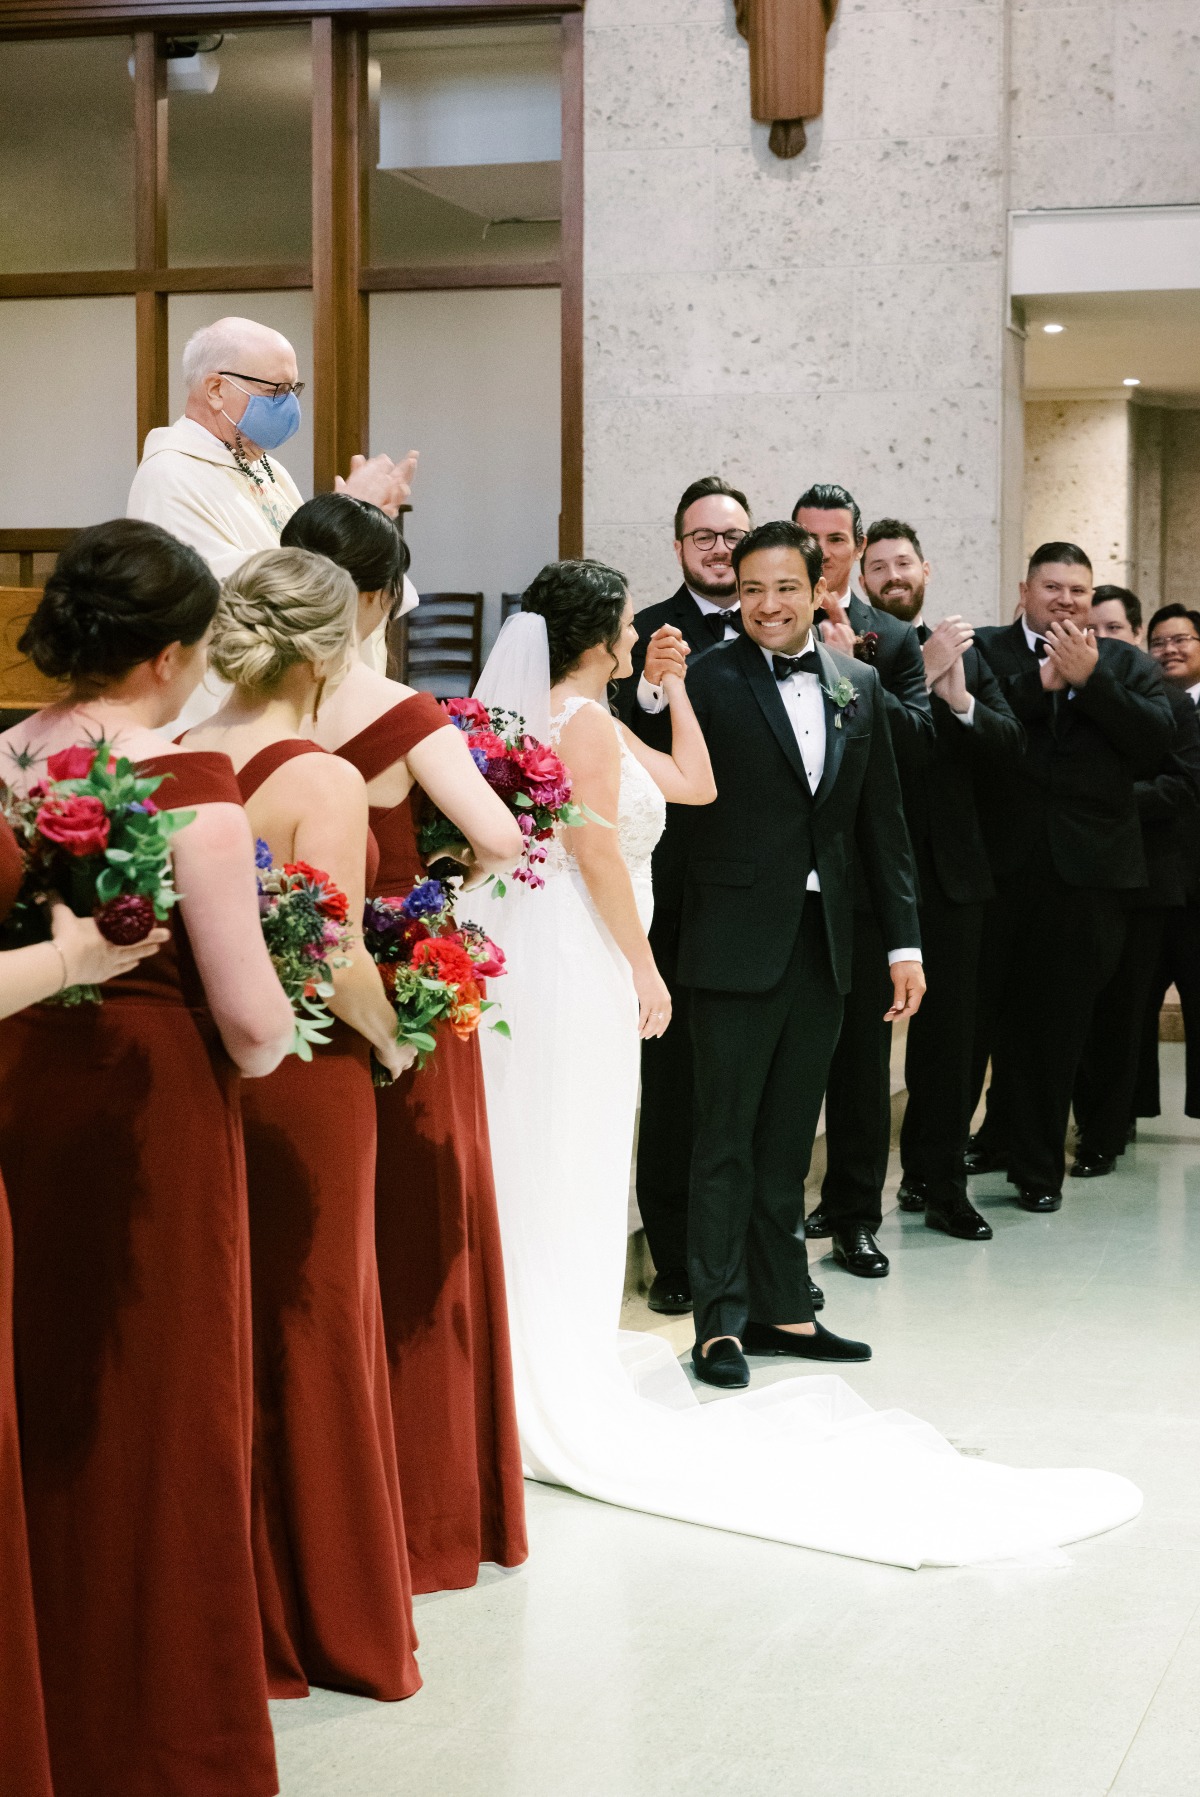 Bride and groom holding hands at wedding ceremony with wedding party surrounding them